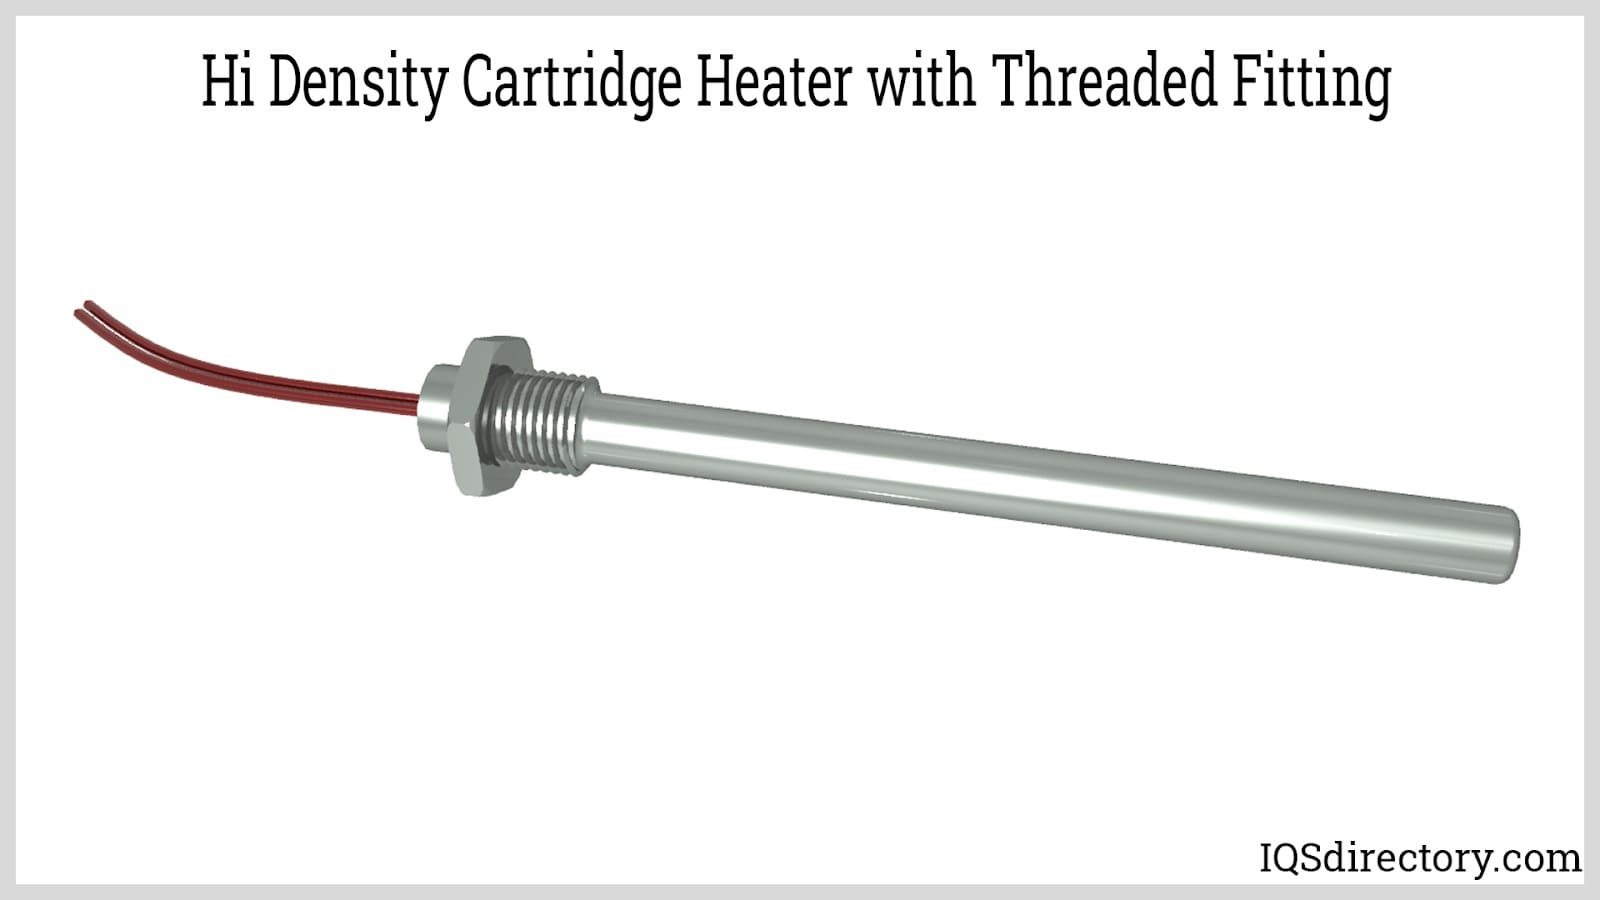 Hi Density Cartridge Heater with Threaded Fitting